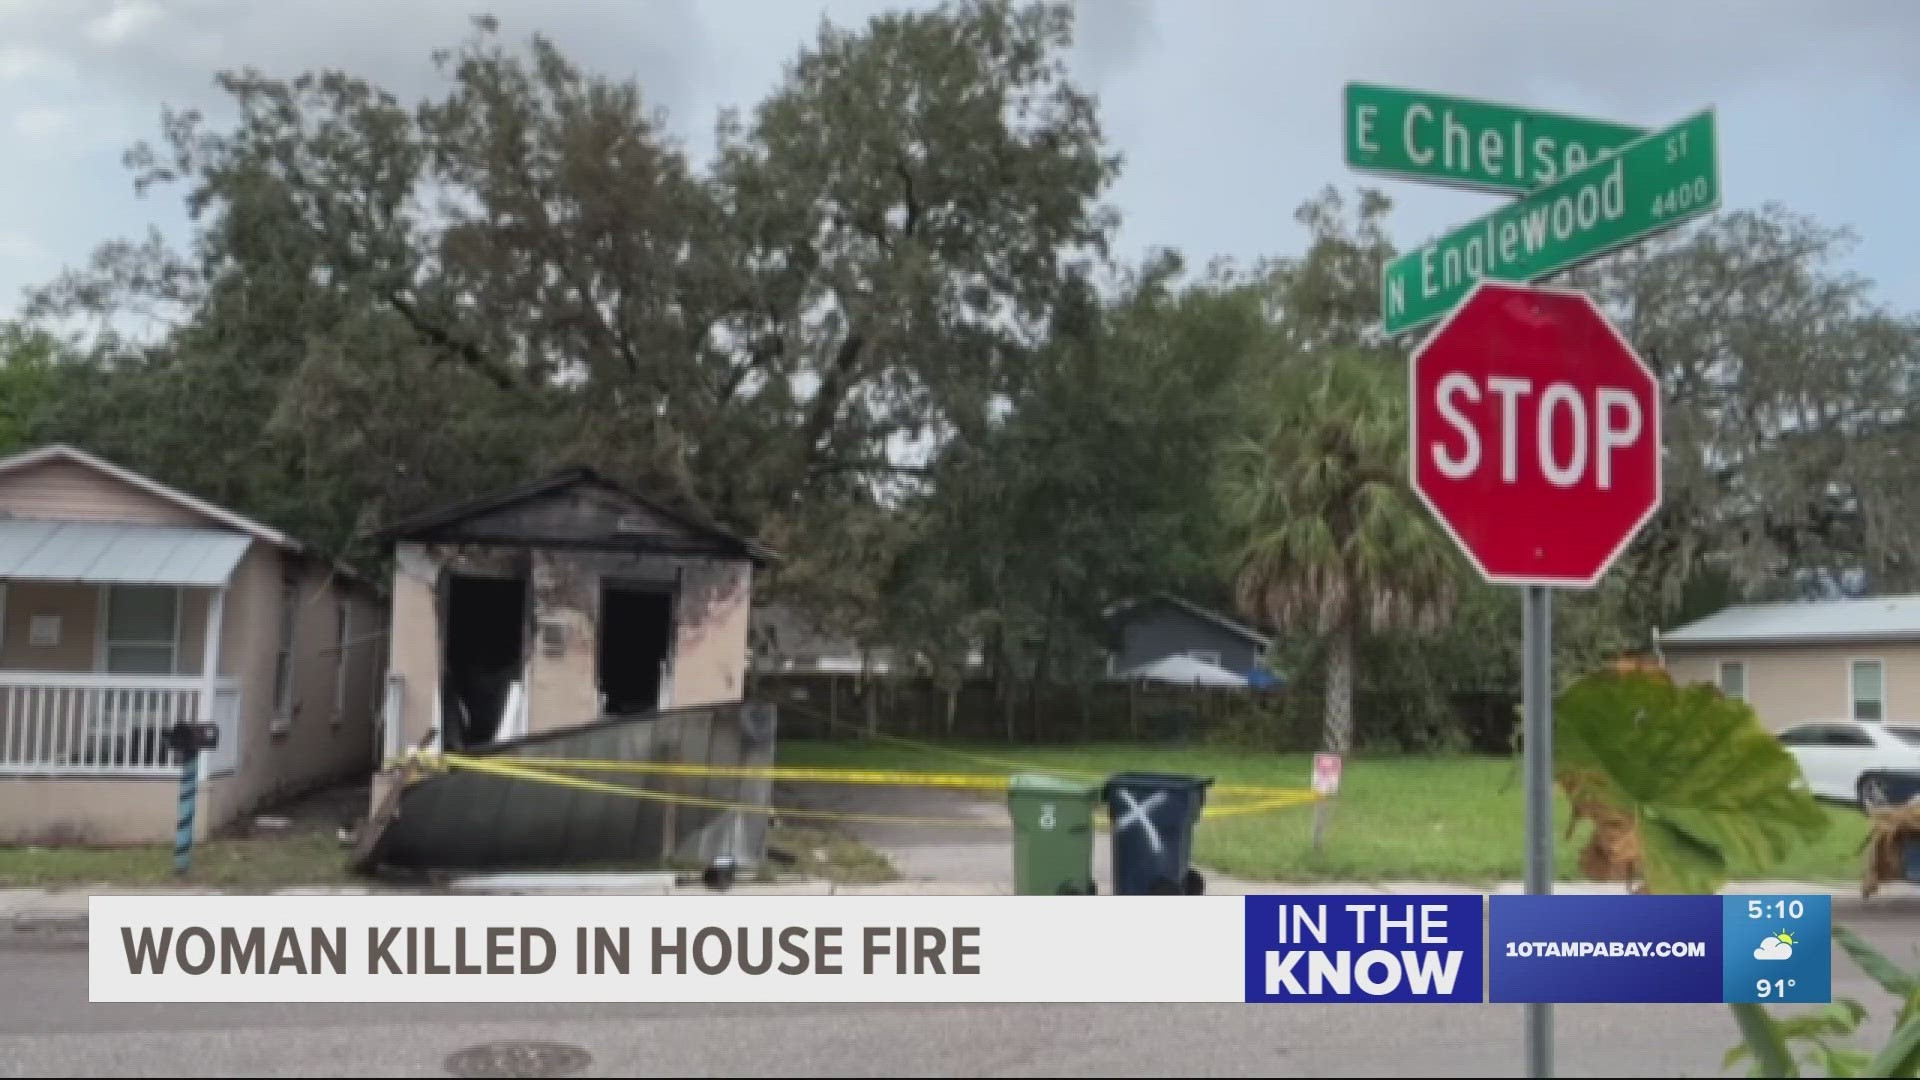 Tampa police said officers responded just around 1:30 a.m. to the area of E Chelsea St and N 22nd St to a home fully engulfed in flames.